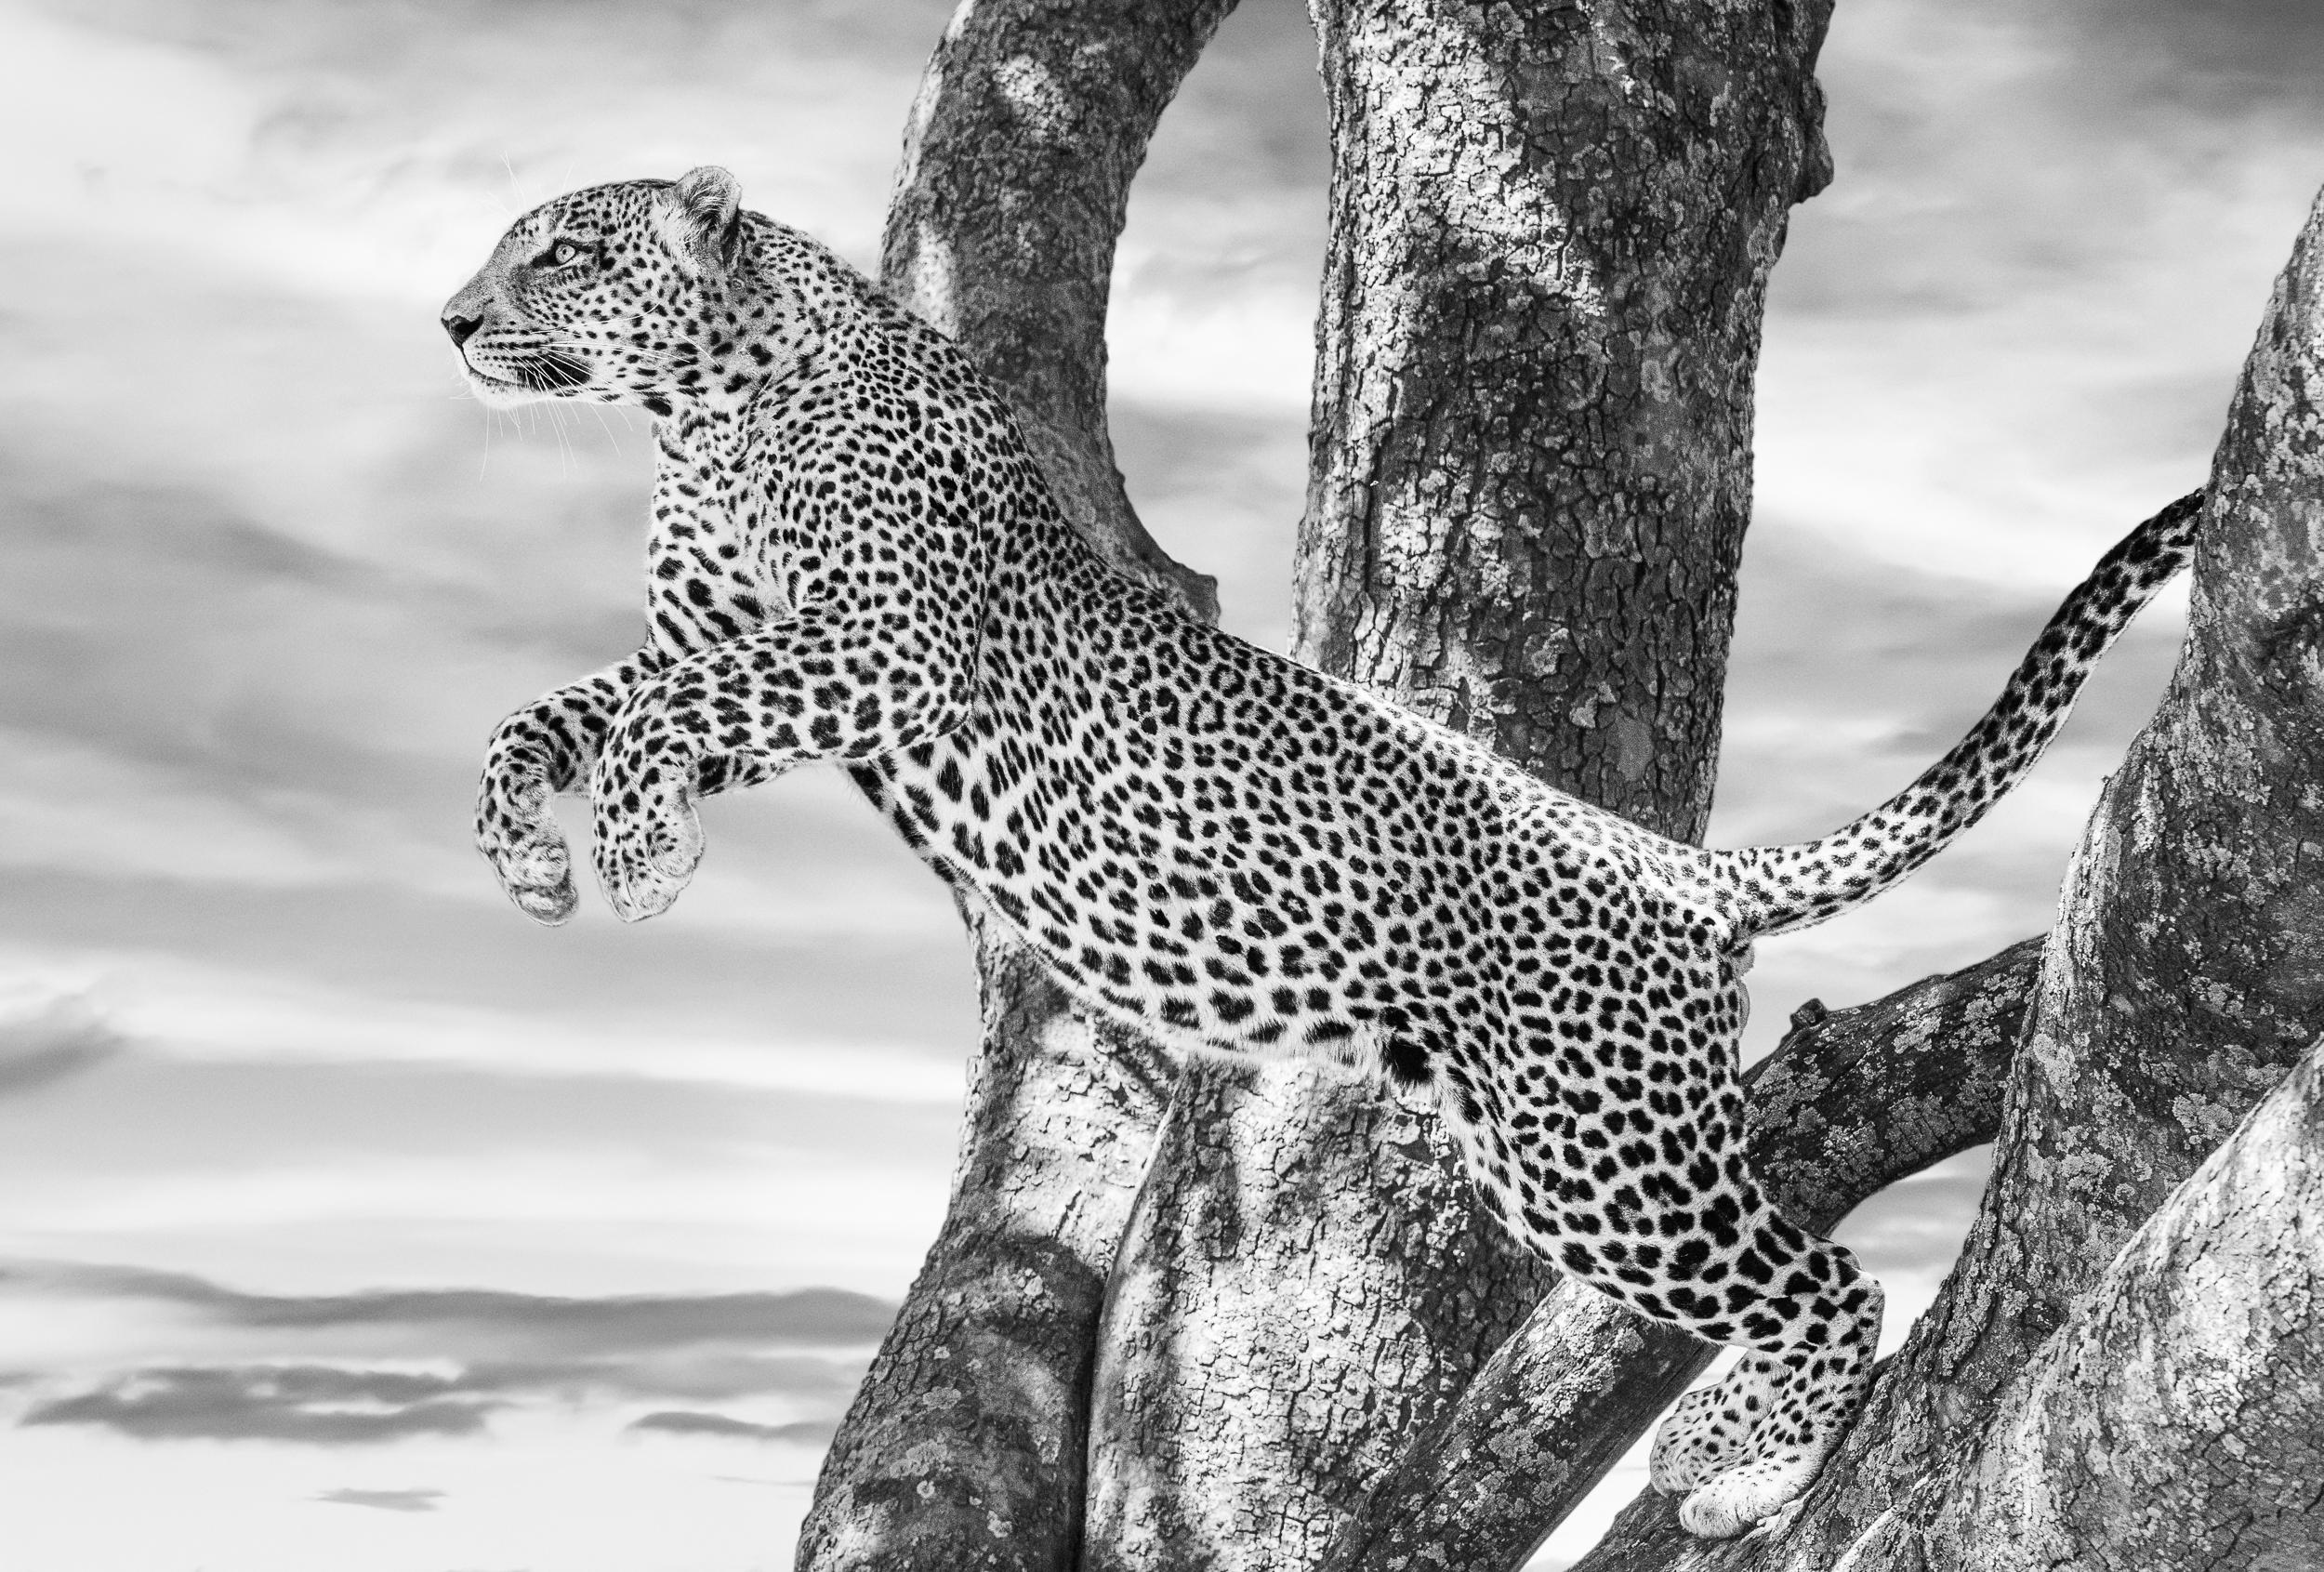 "I spend considerable time dreaming up photographic scenarios in the wild and how I might have a chance of making them come to life. These ideas are followed by in-depth research of various locations across East Africa to pinpoint places where I